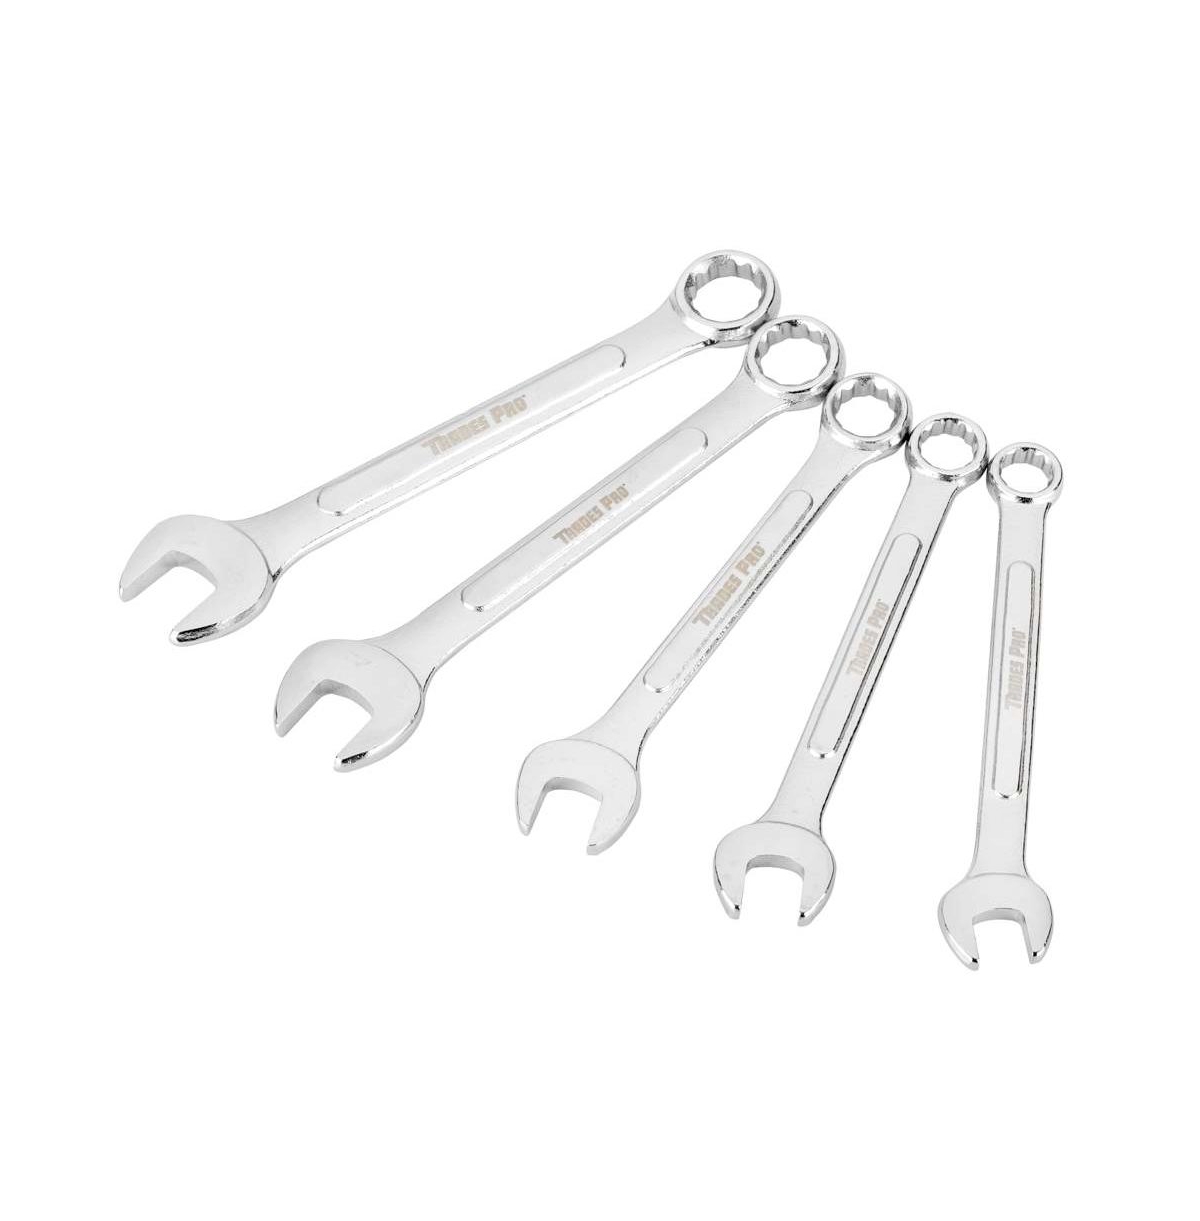 5 Piece Metric Combination Wrenches - Silver